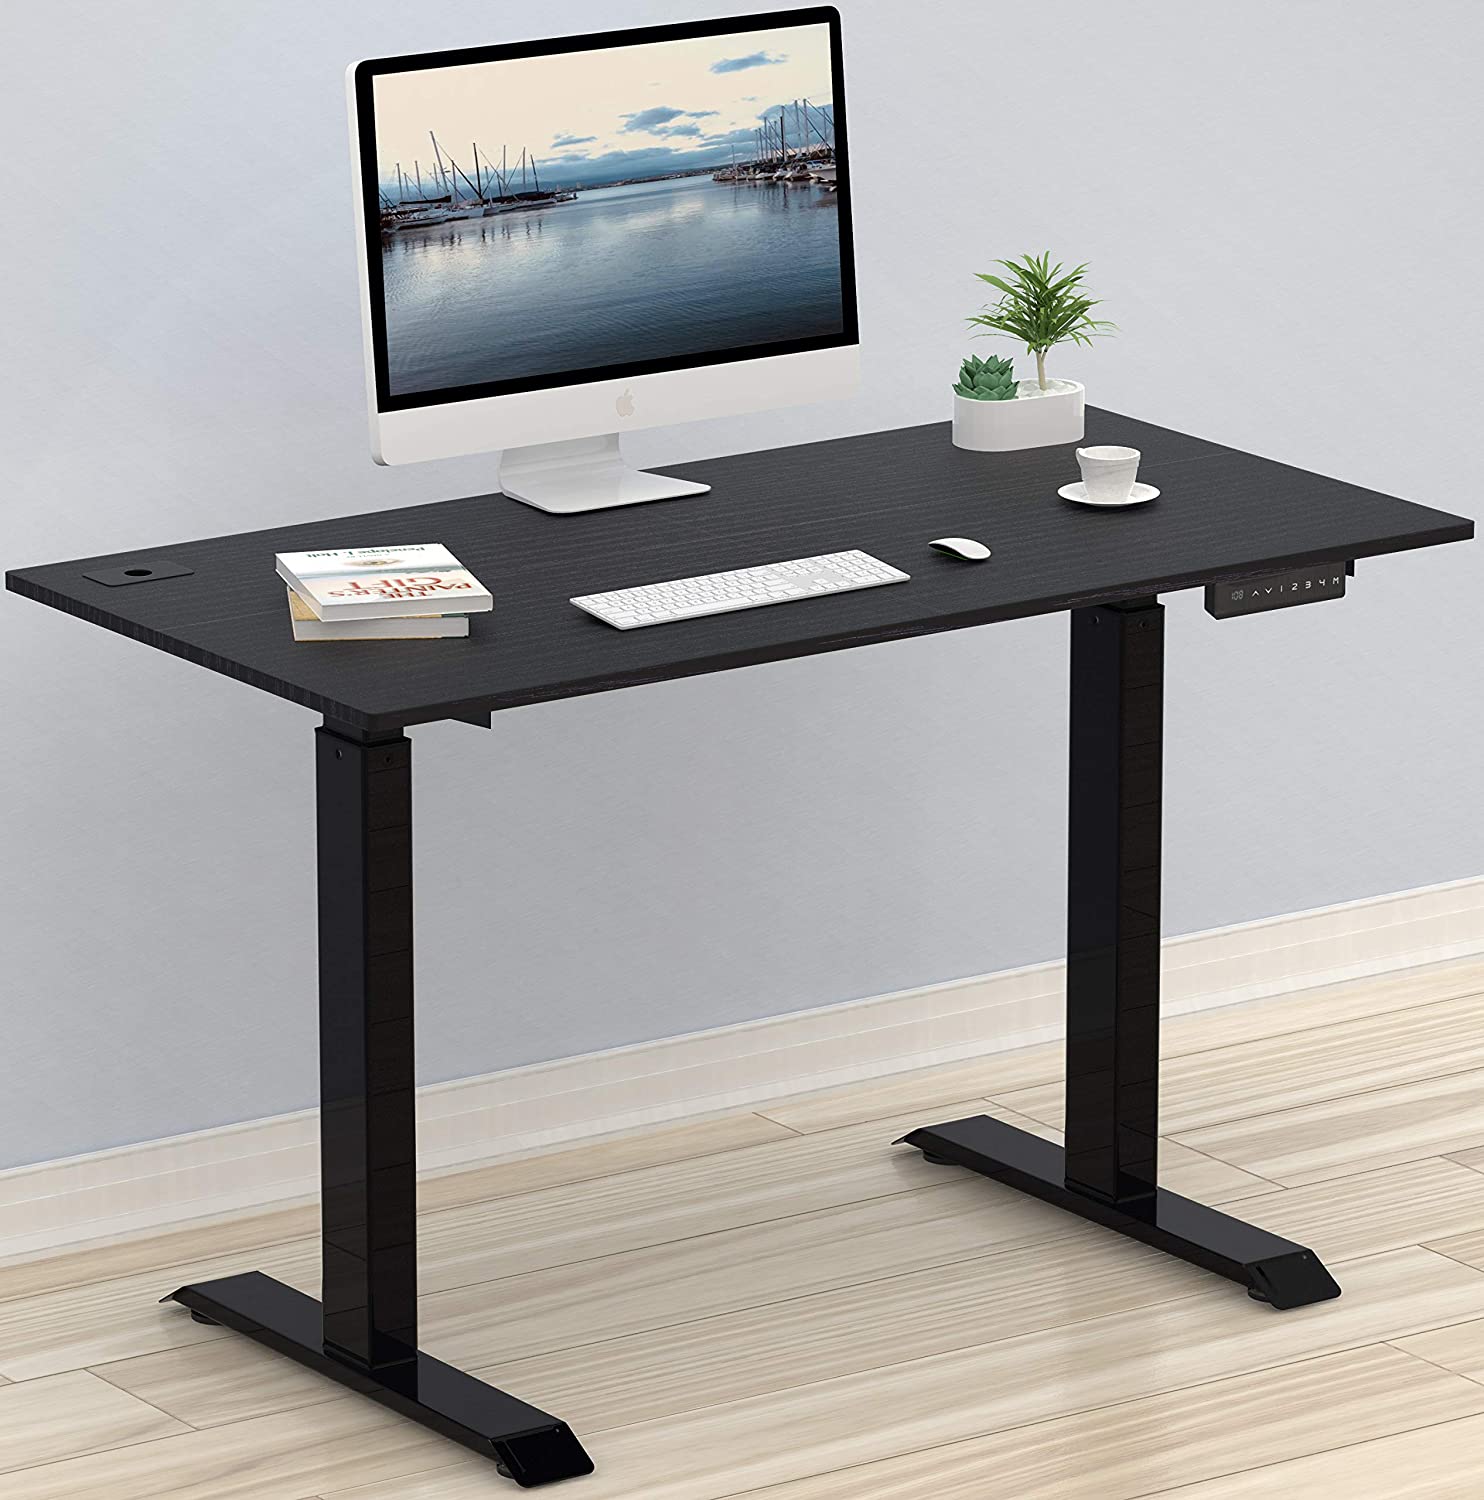 SHW Electric Height Adjustable Computer Desk, 48 x 24 Inches, Black